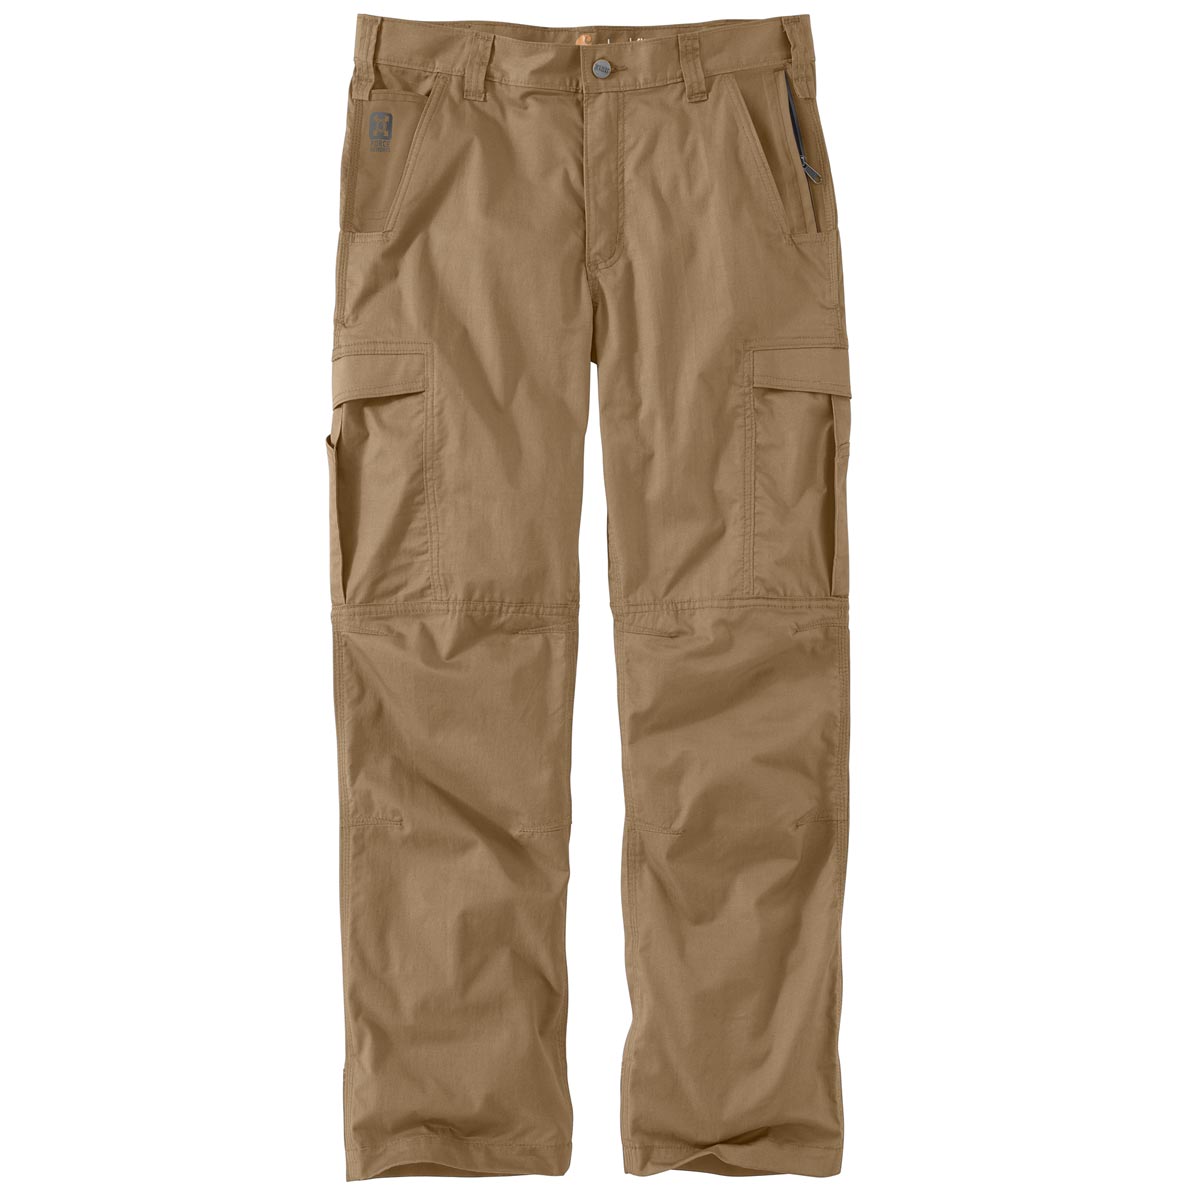 Carhartt Men's Force Extremes Cargo Pant